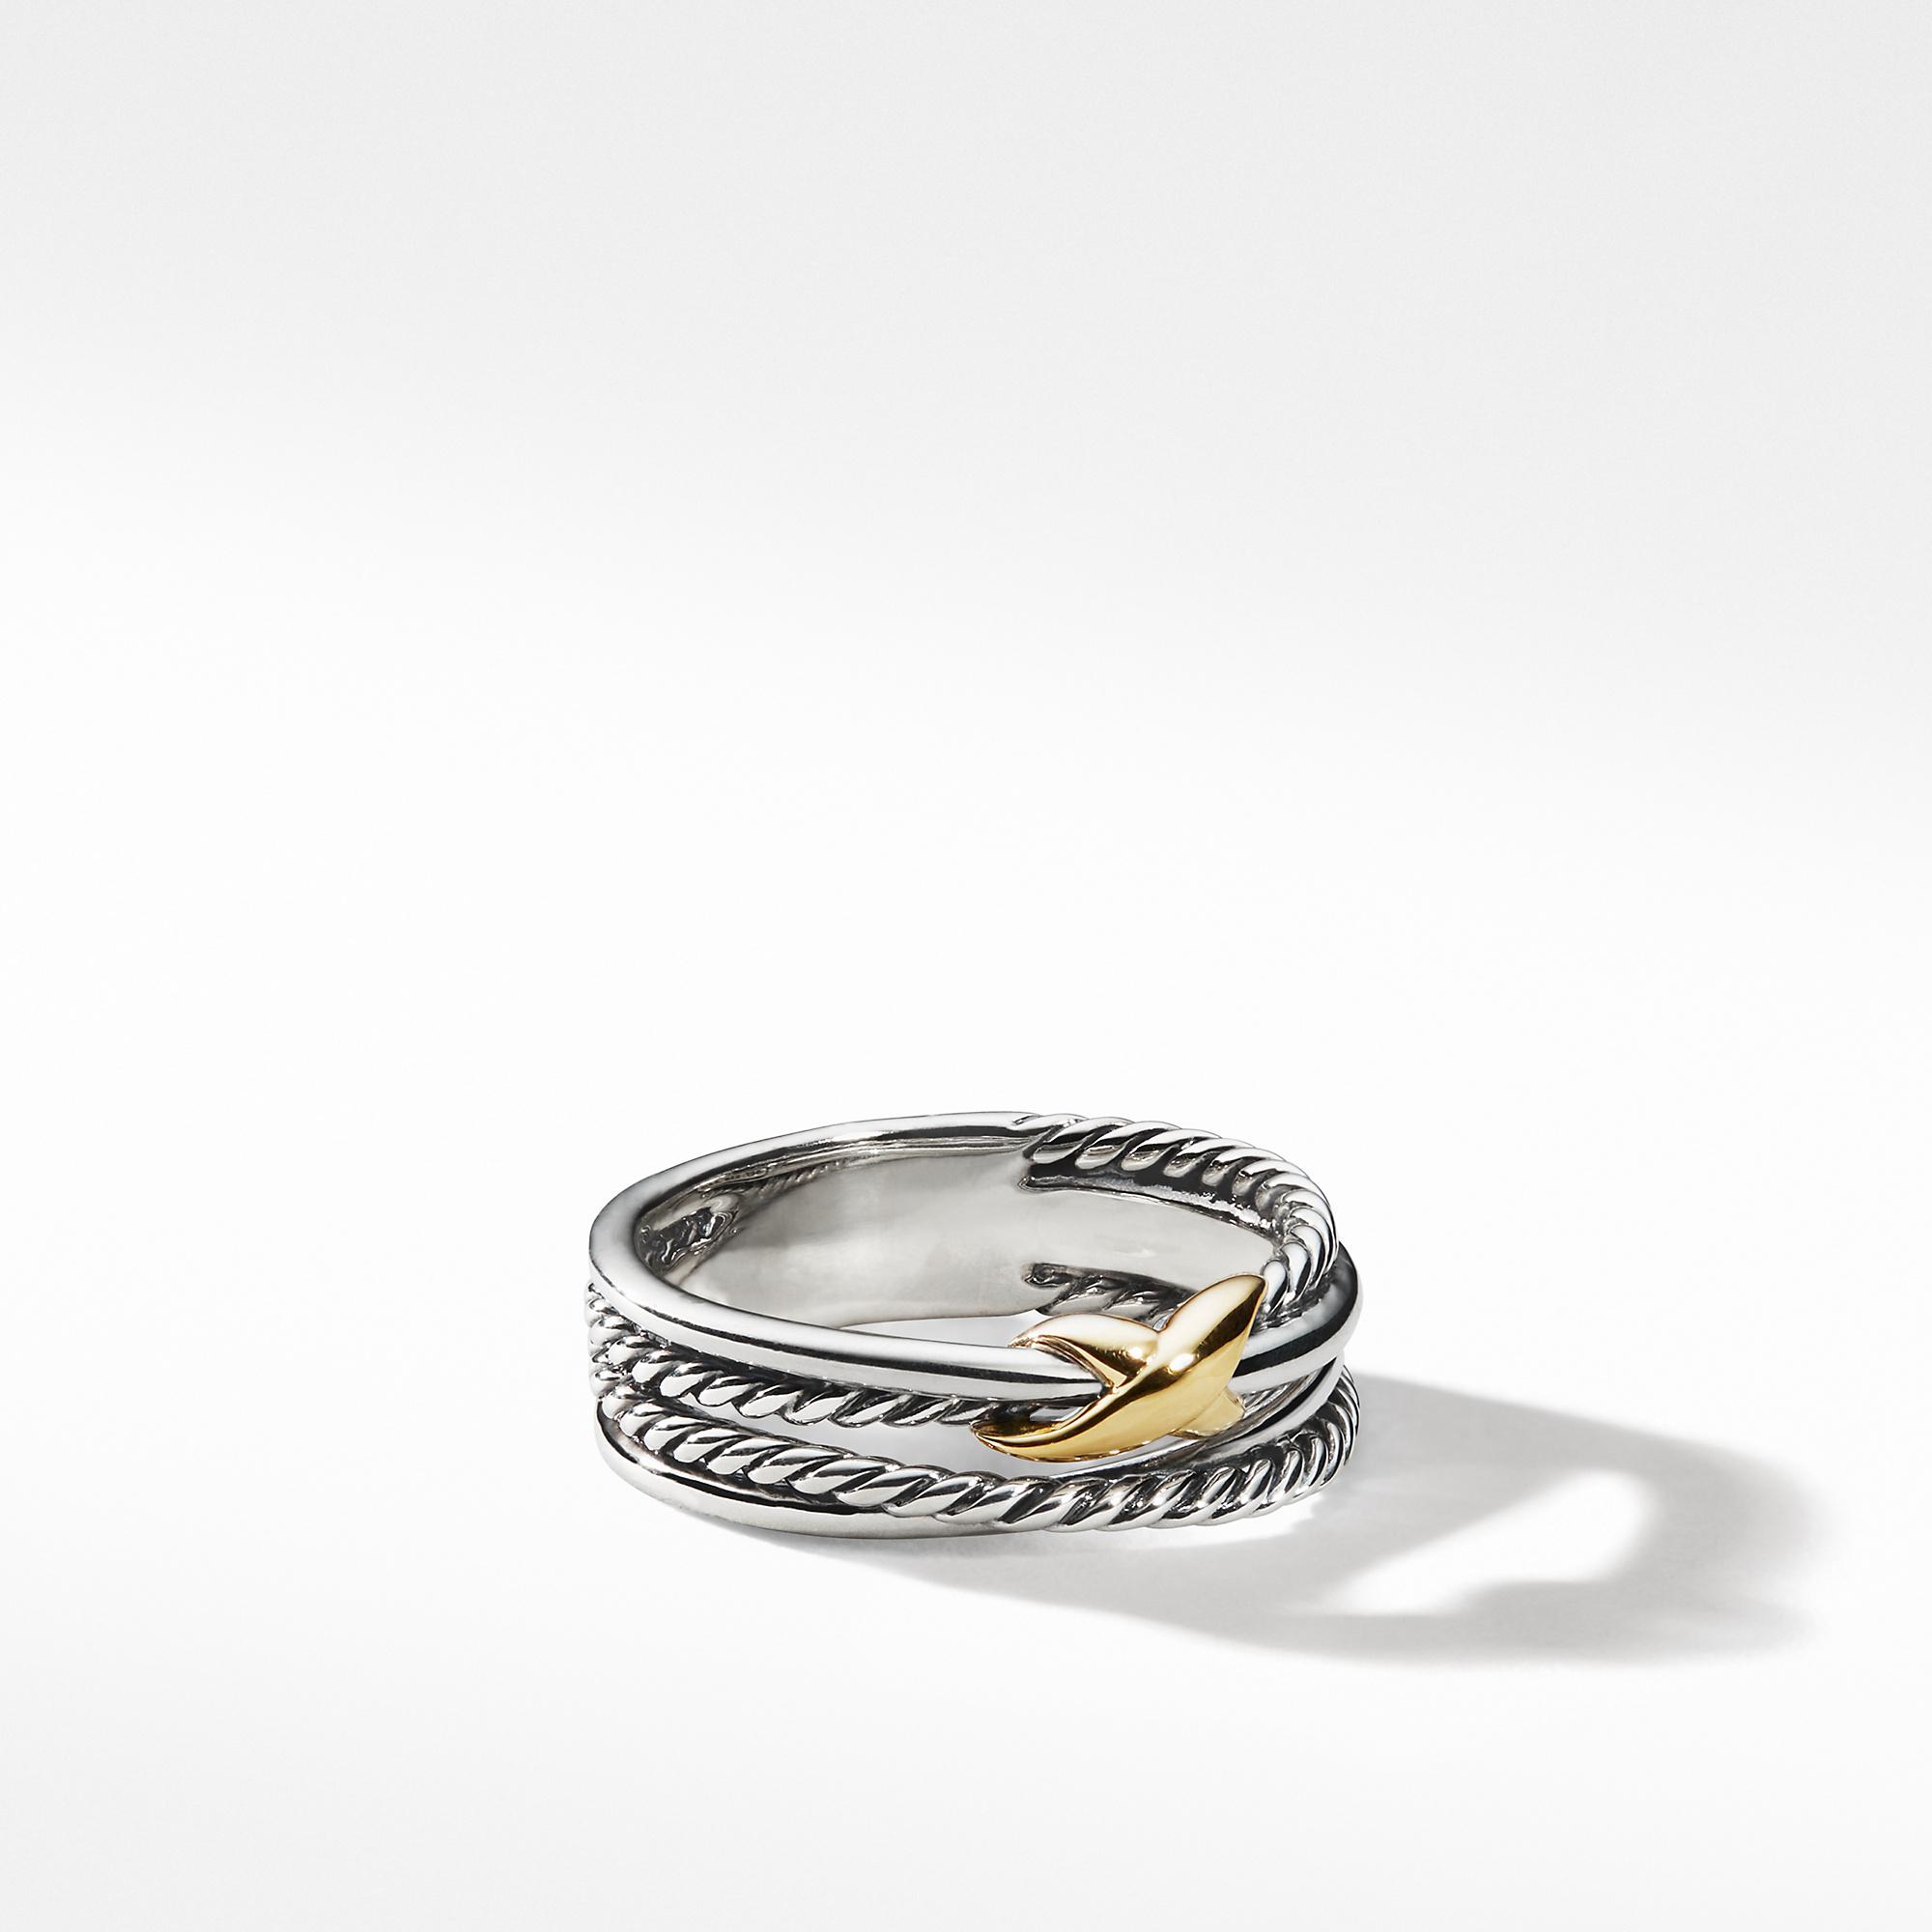 David Yurman X Crossover Ring in Sterling Silver and 18k Yellow Gold, size 6